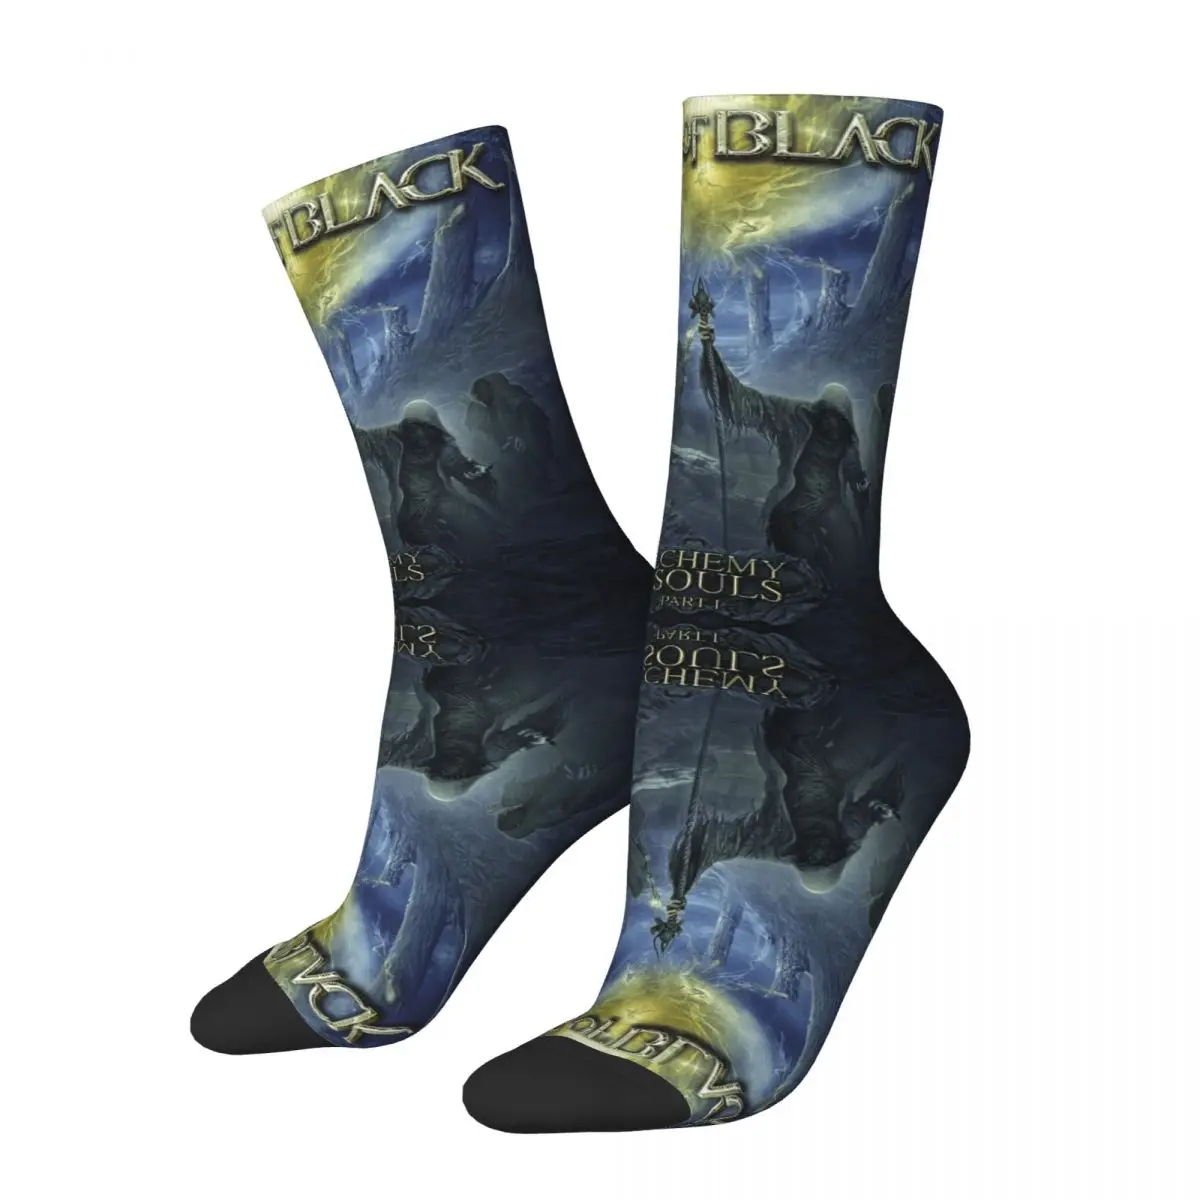 

Vintage The LORDS OF An BLACK - Alchemy Of Souls, Pt. I (2020) R298 Stocking The Best Buy Elastic Socks Humor Graphic